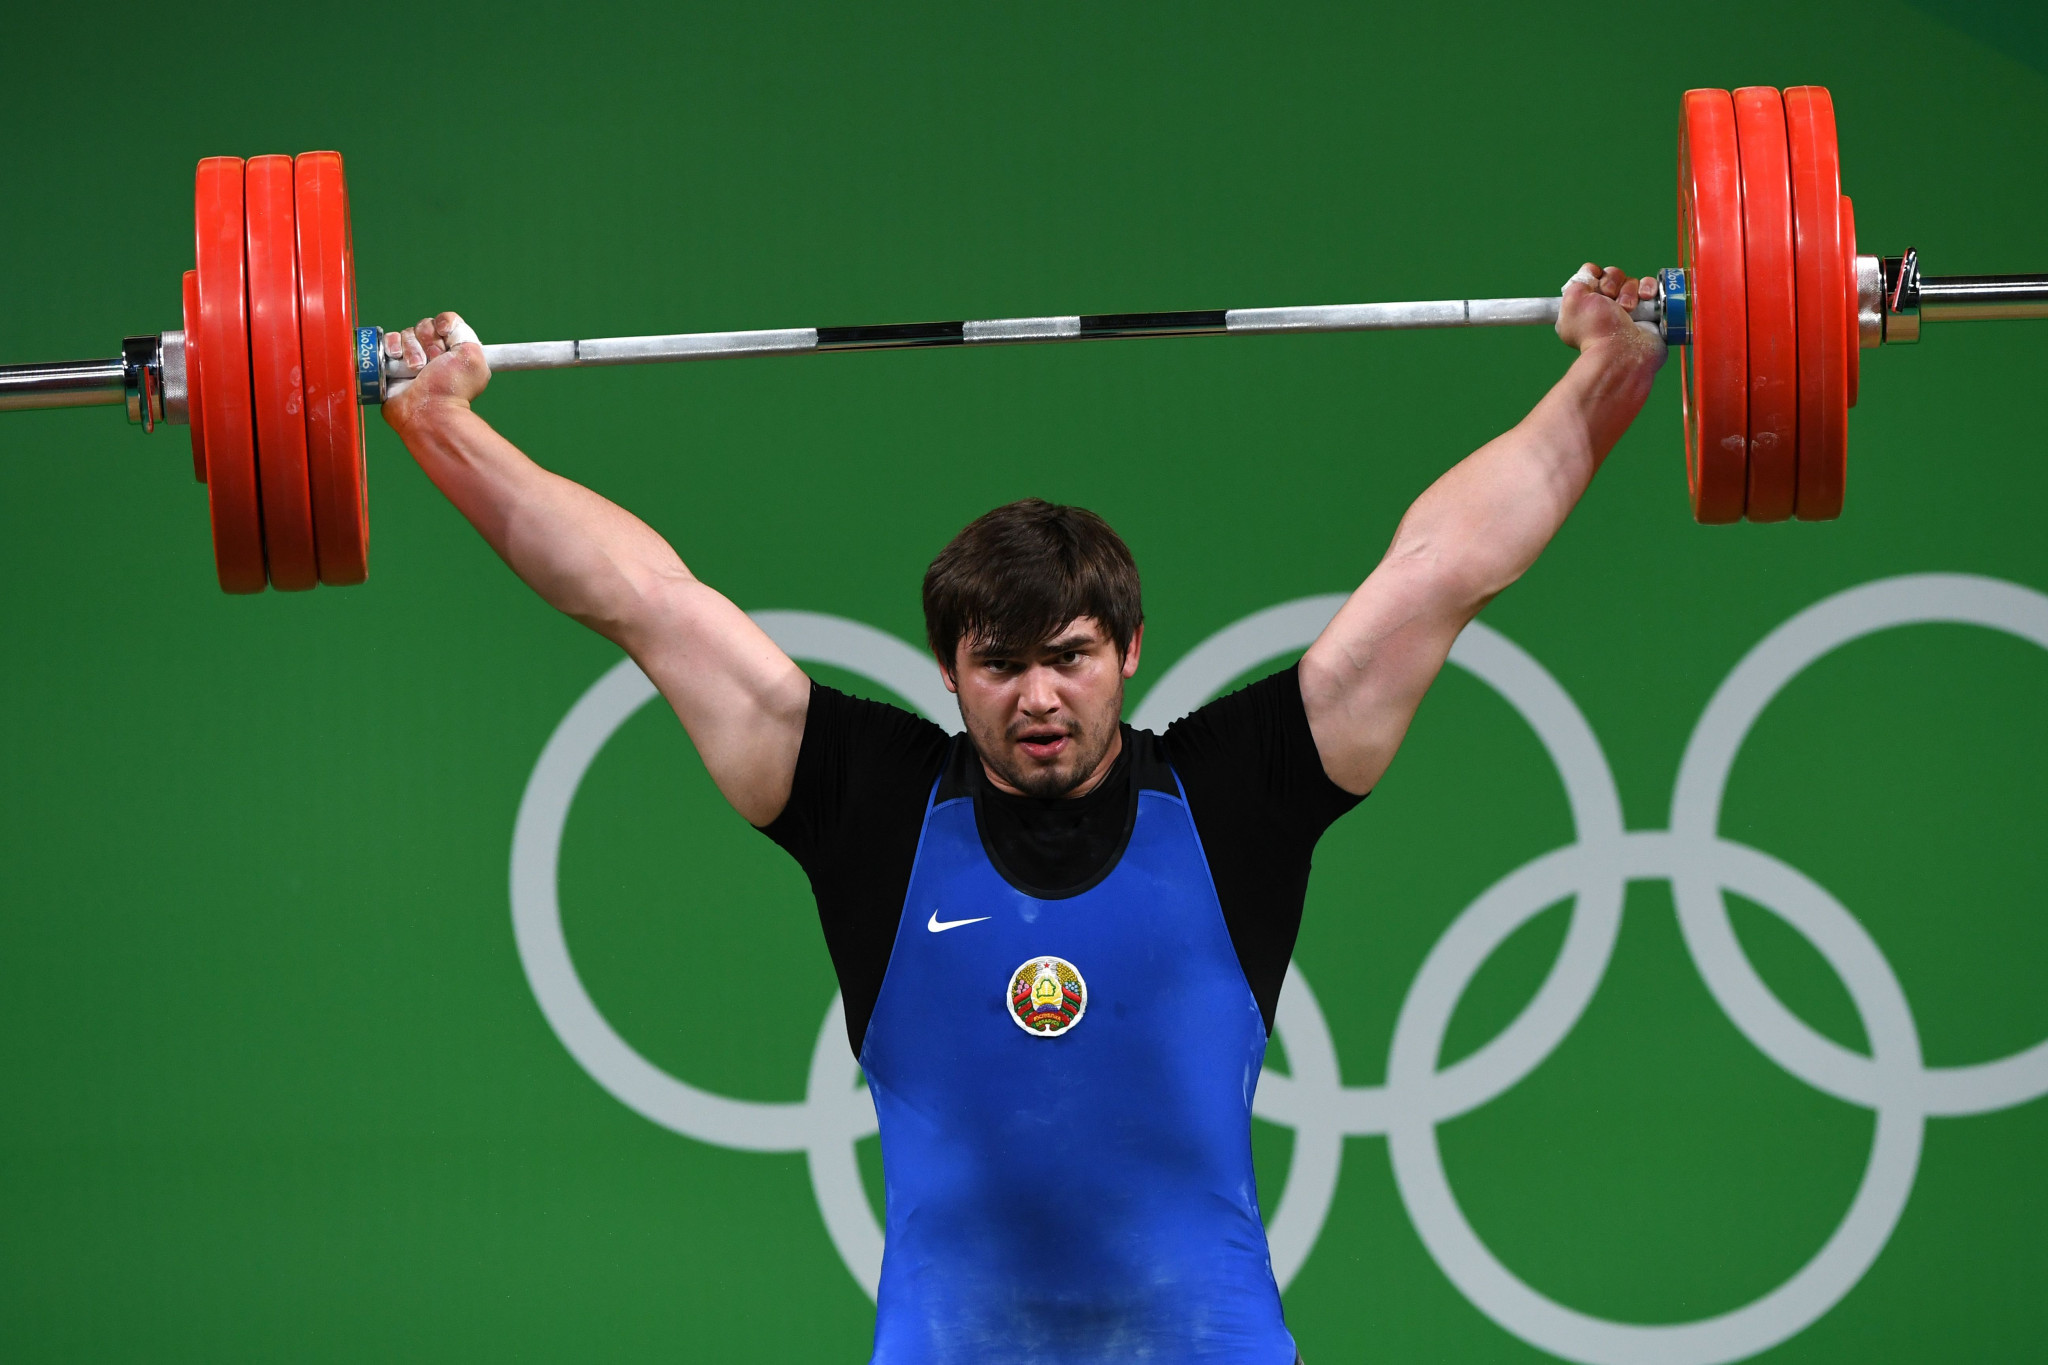 Belarusian weightlifter Aliksei Mzhachyk will look to qualify for his second Olympics ©Getty Images